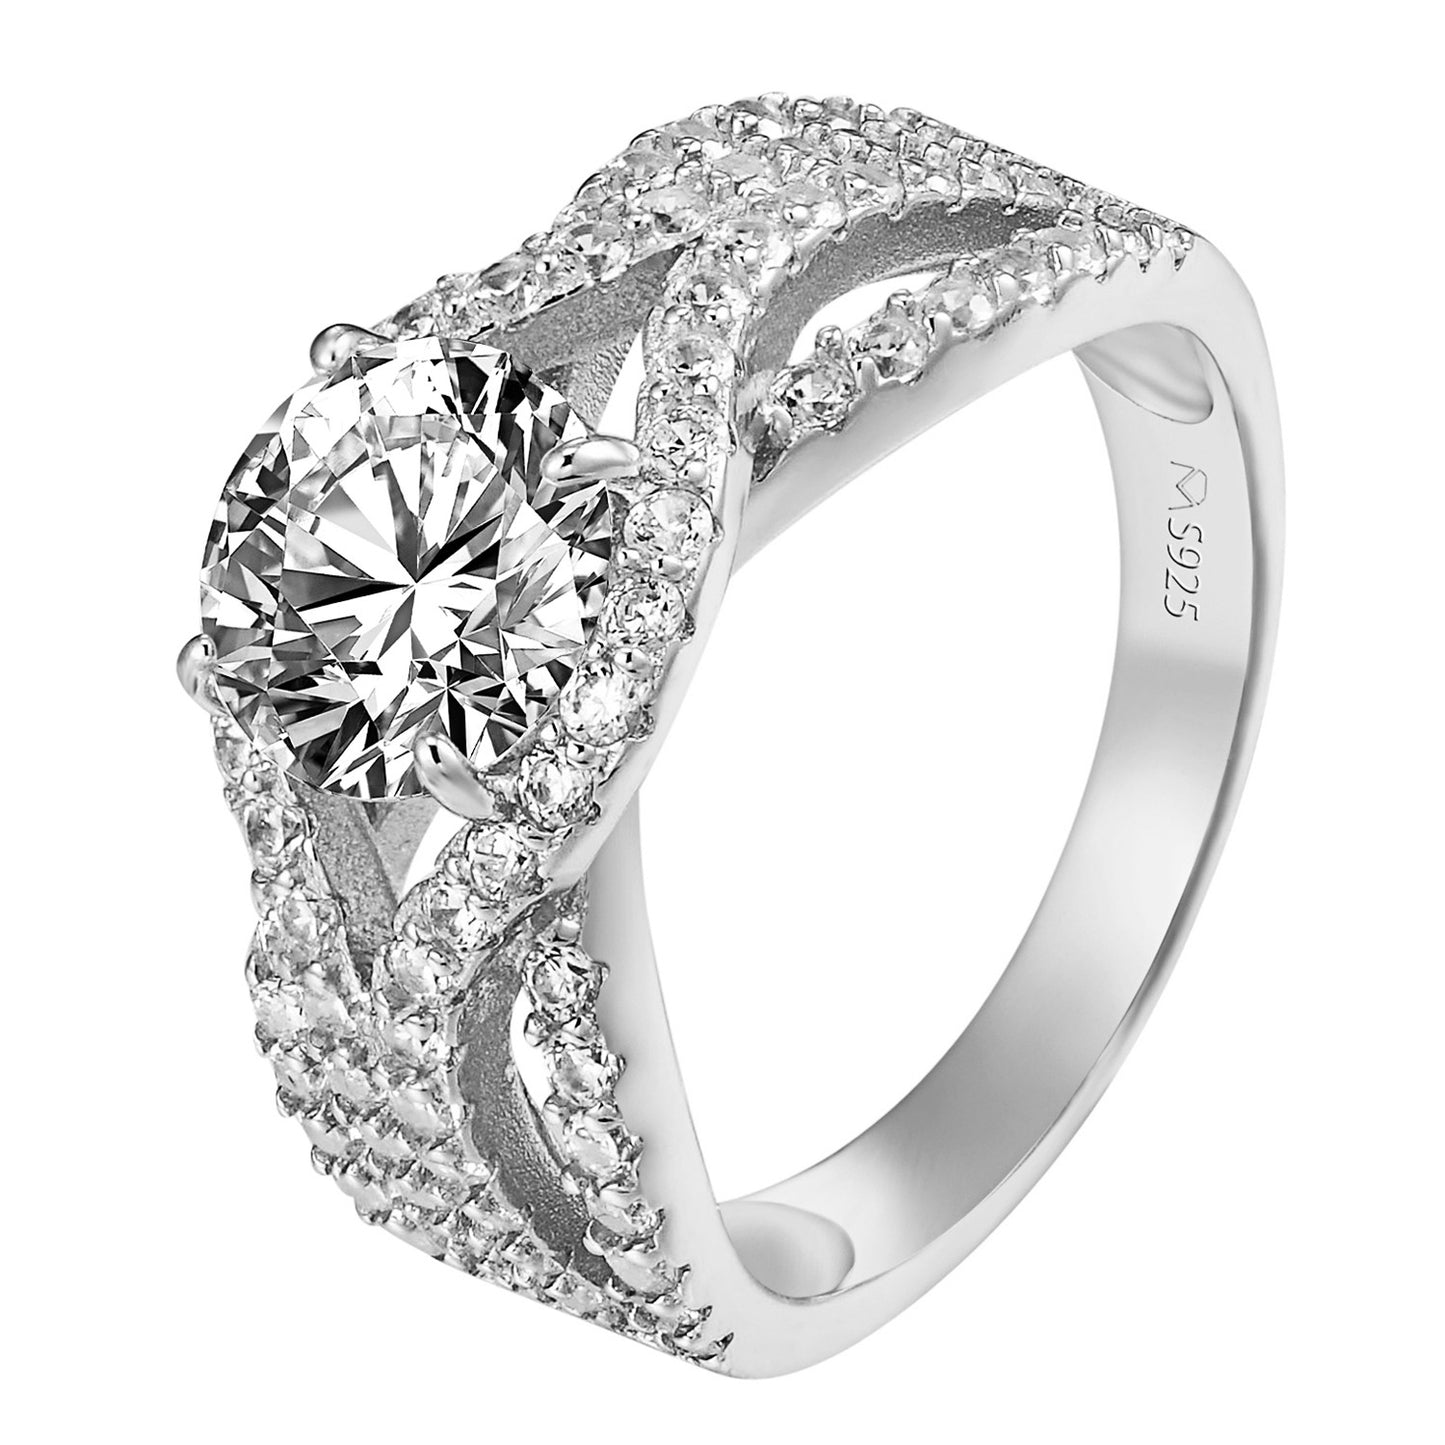 Solitaire Round Cut Ring Wedding Womens Bridal Engagement Sterling Silver CZ New